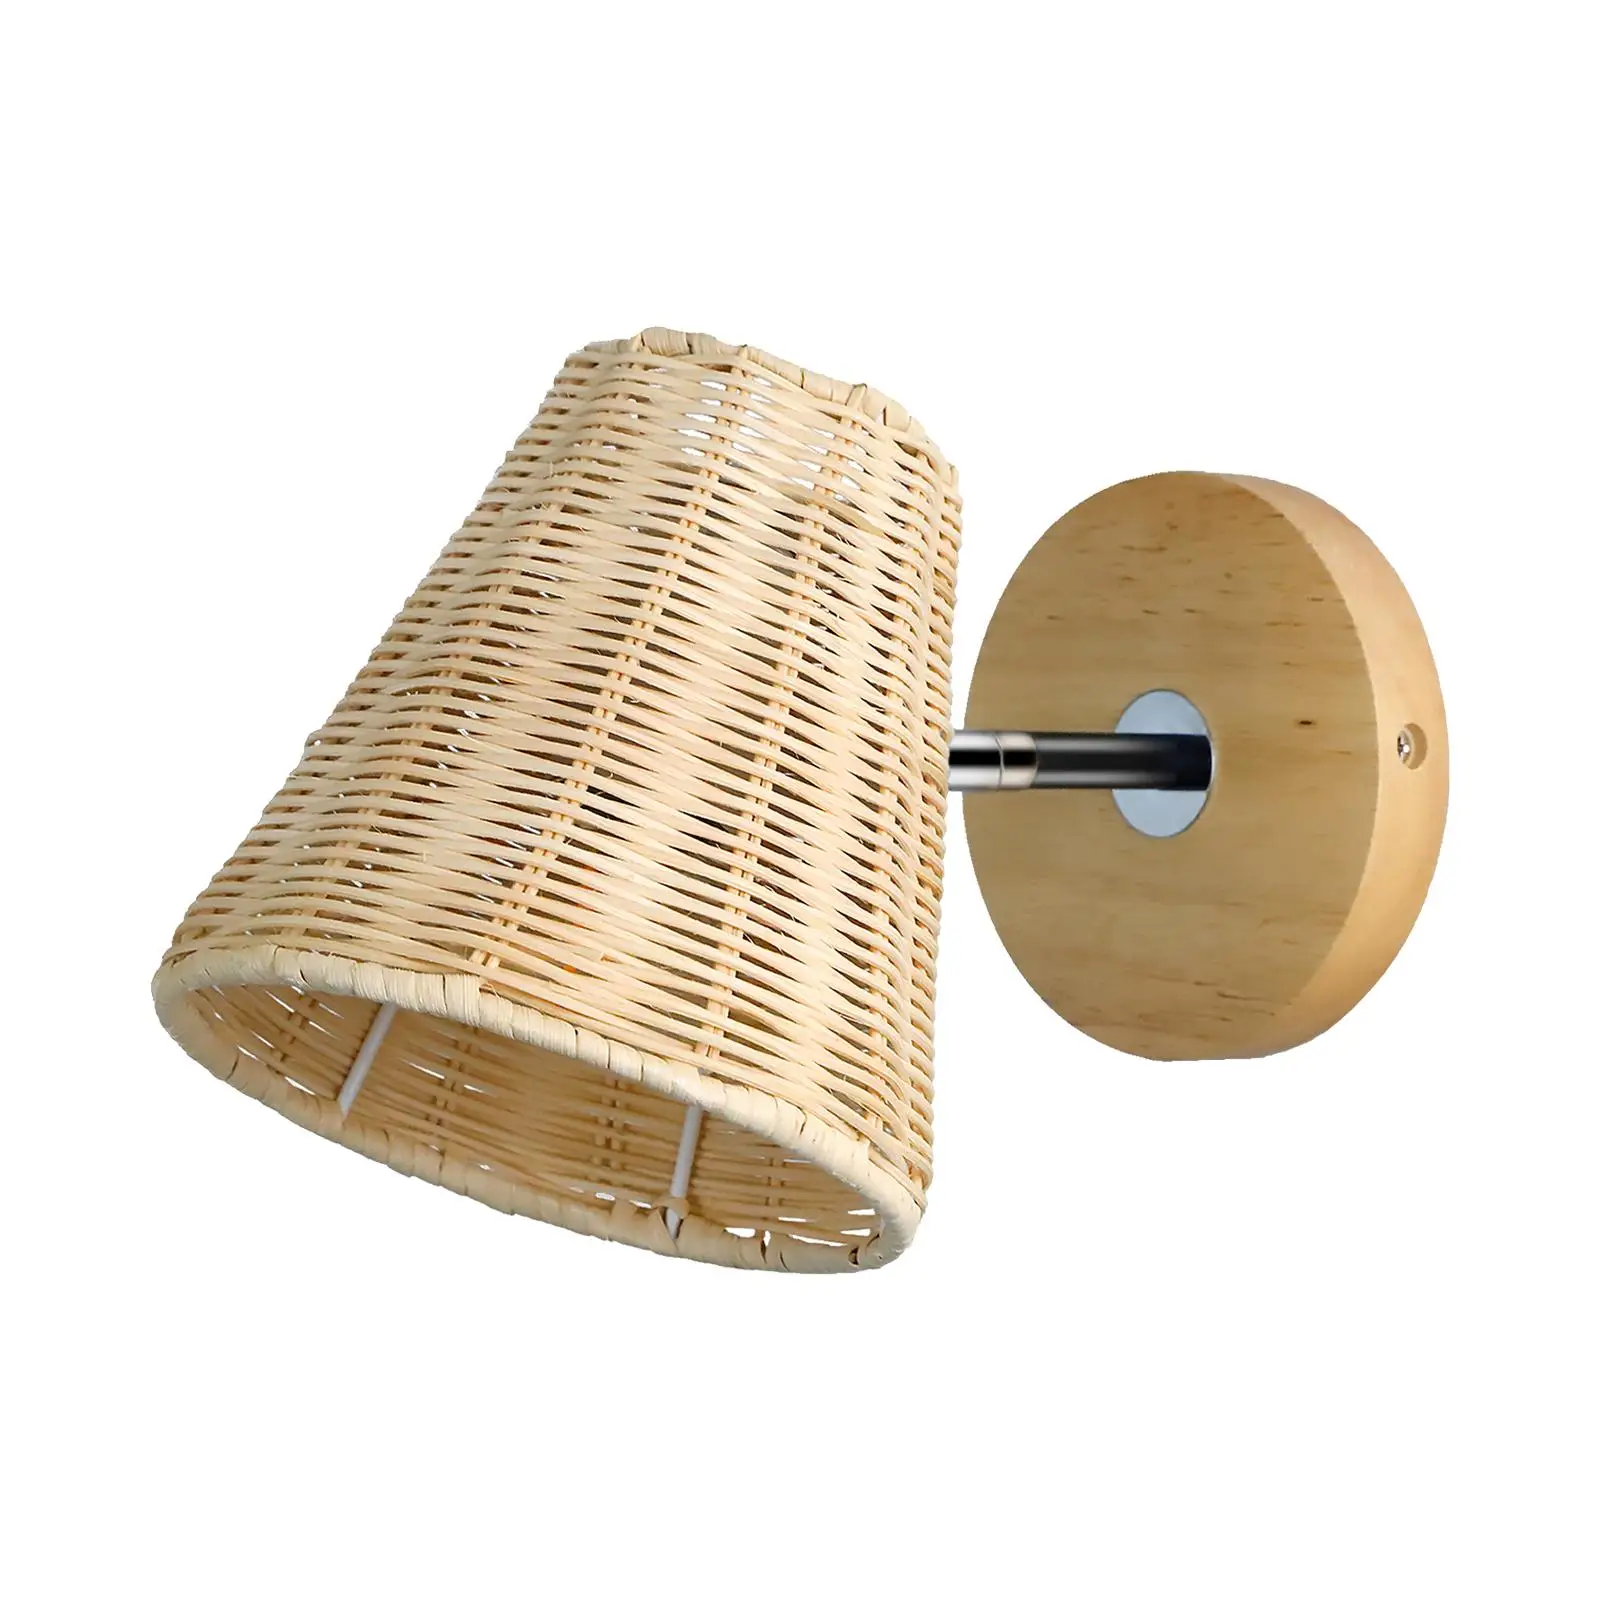 Rattan Wall Sconce Decorative Indoor Lighting Angle Adjustable Wall Mounted Bedside Lamp for Porch Restaurant Corridor Loft